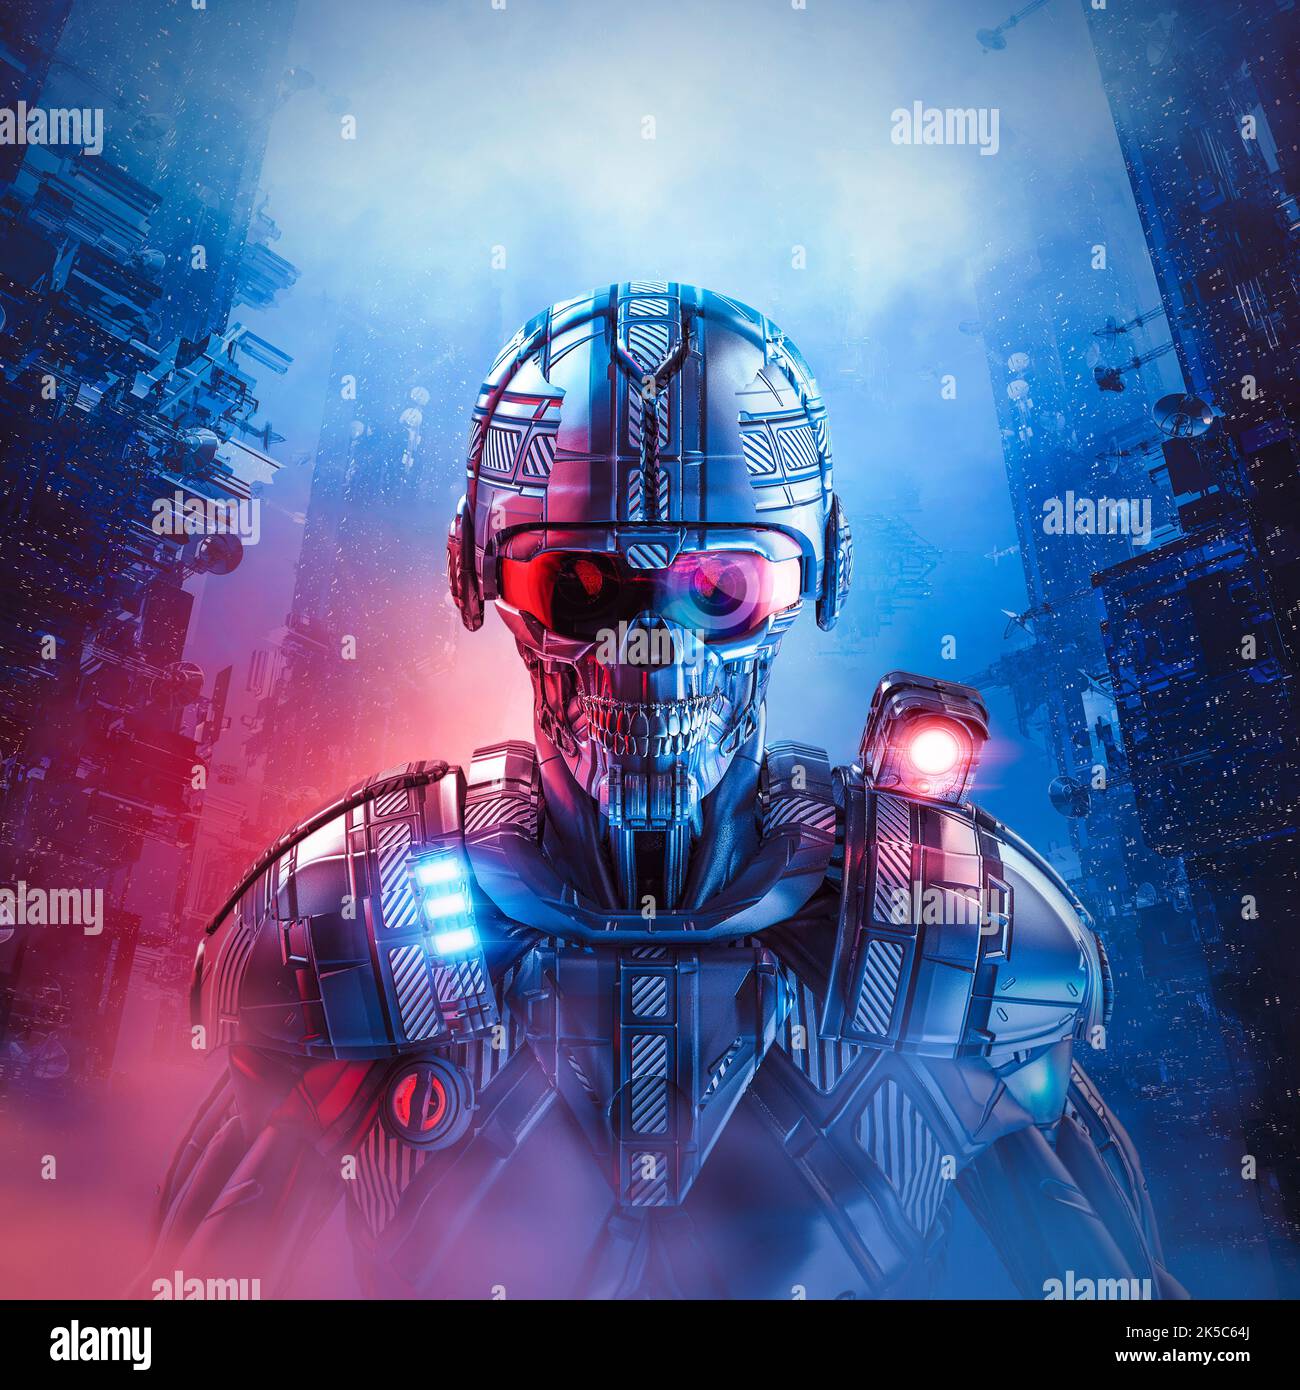 Robot police officer - 3D illustration of skull faced science fiction cyberpunk law enforcement android patrolling futuristic city Stock Photo